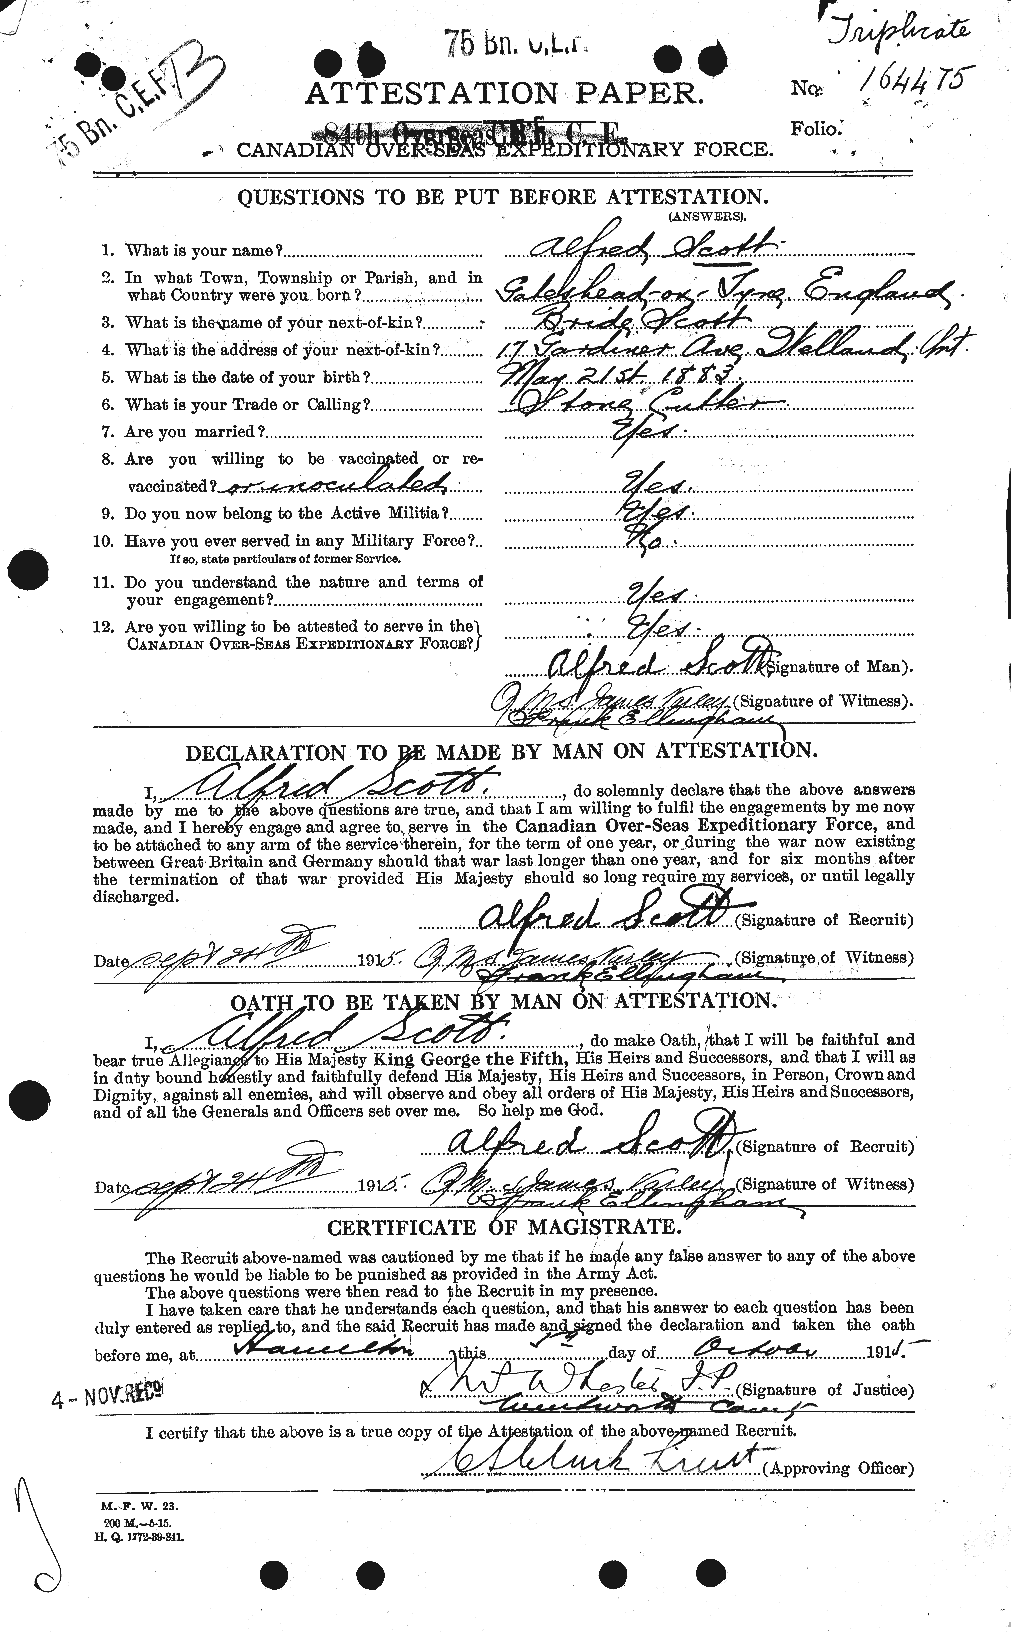 Personnel Records of the First World War - CEF 086589a